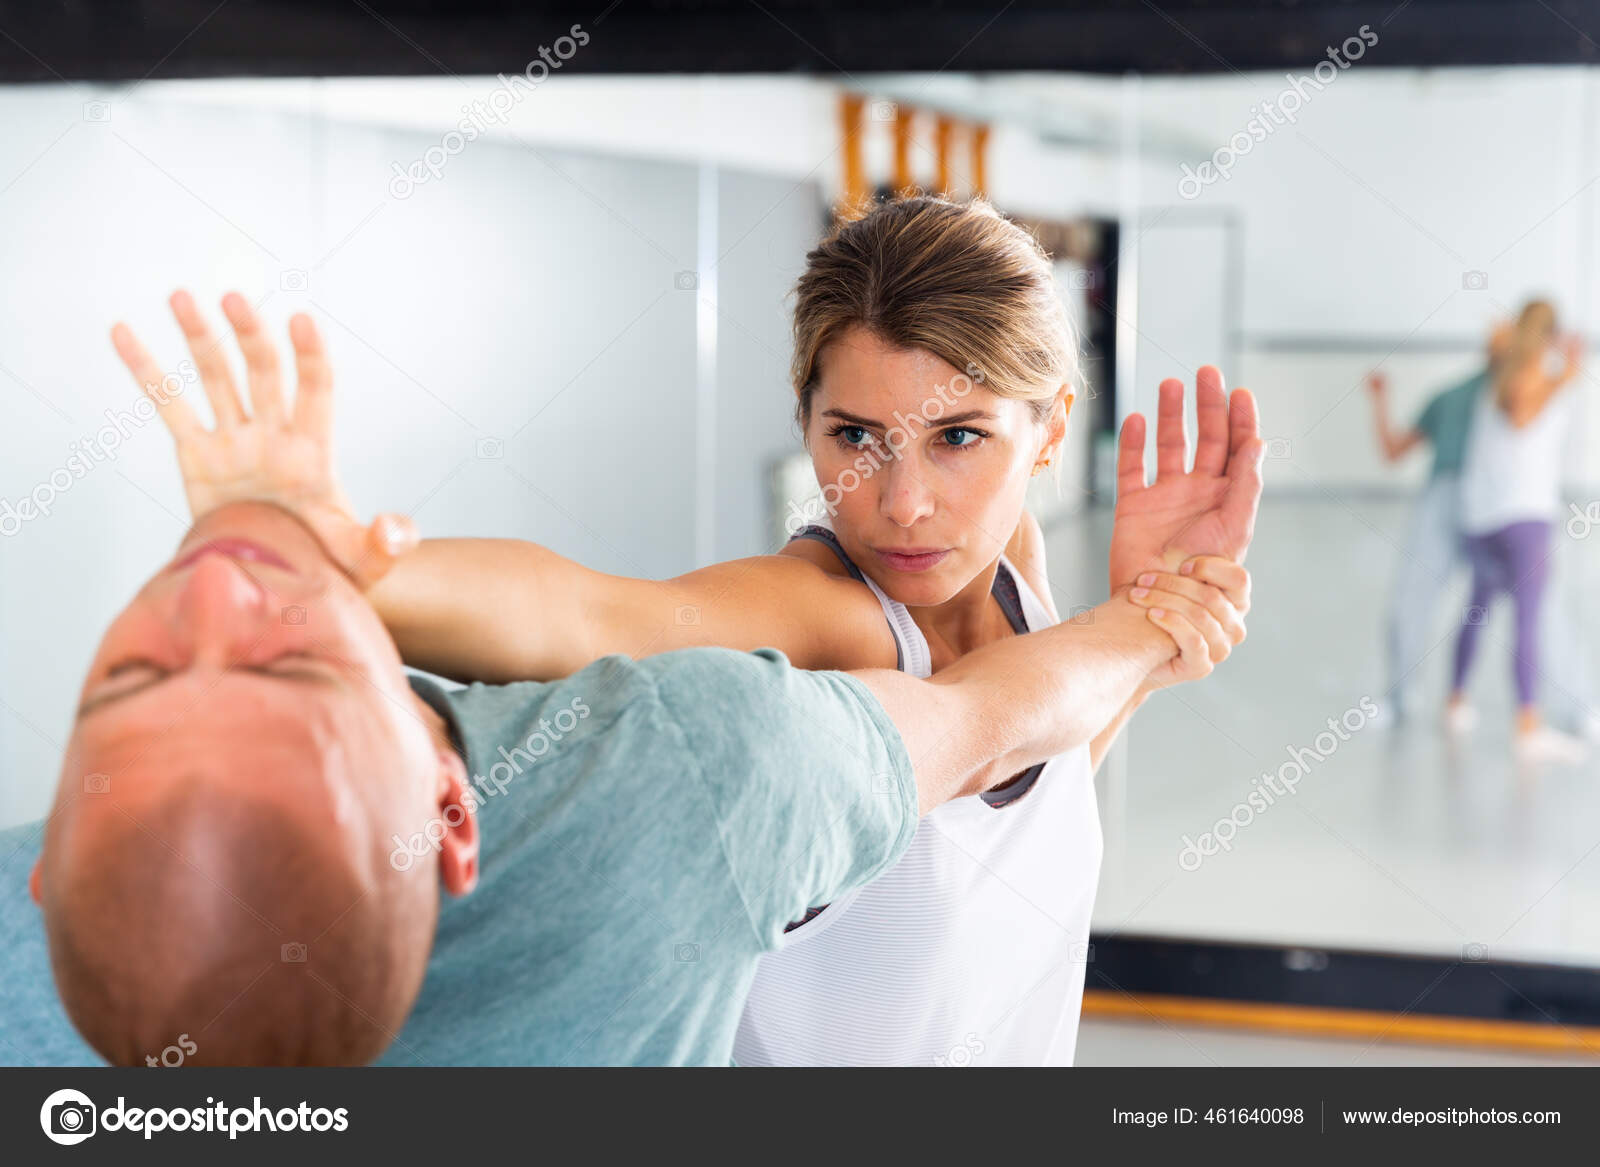 Woman Performing Palm Heel Strike While Training In Gym Stock Photo By C Jim Filim